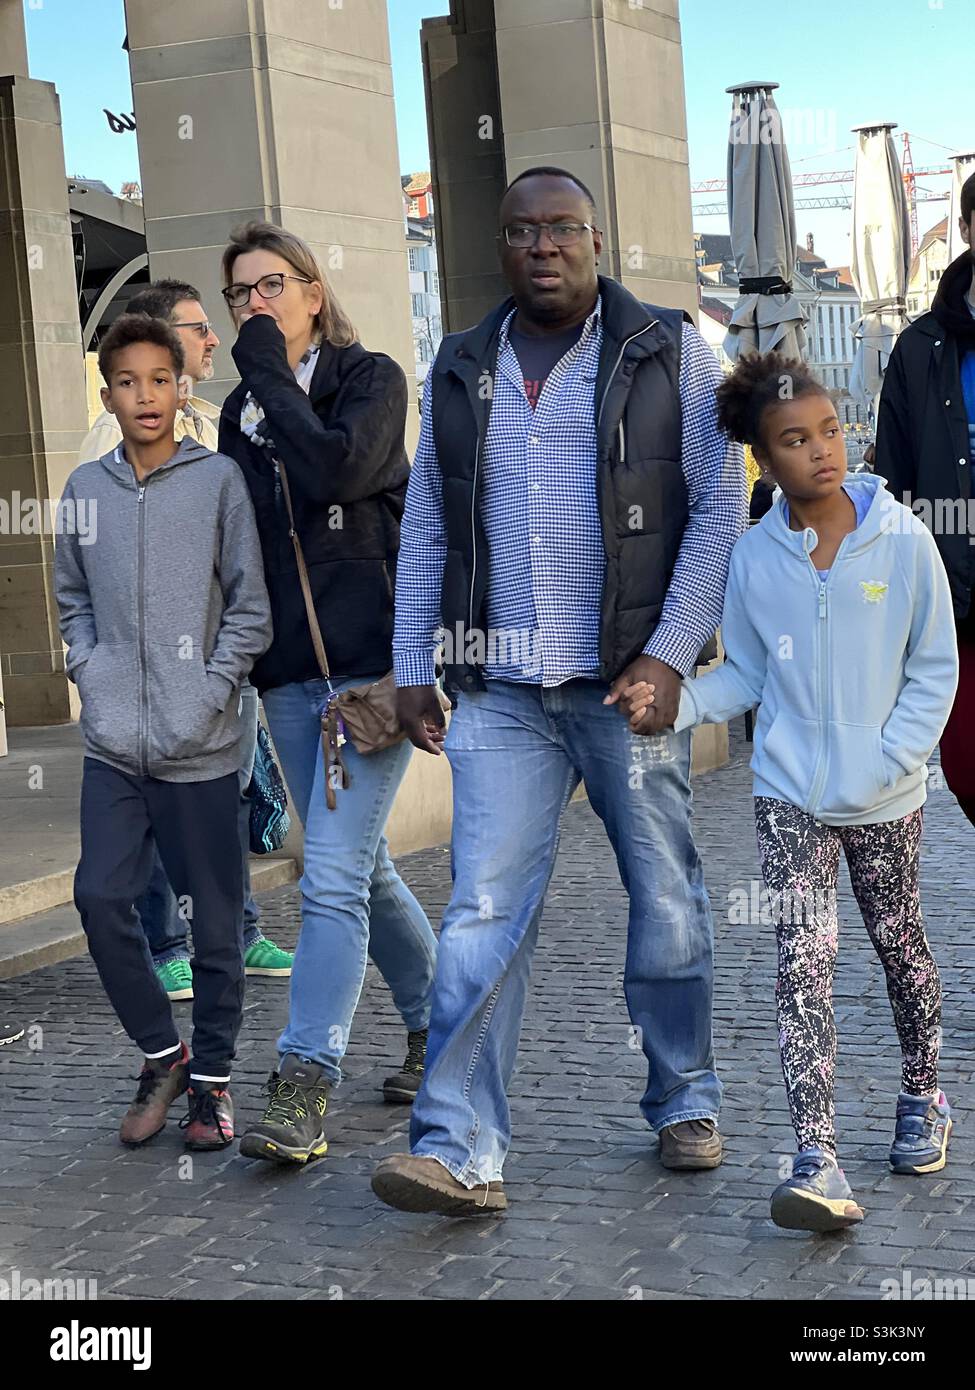 Interracial family two heterosexual parents and two children walking in the streets of old town Zürich in Switzerland. They enjoy their time together. Stock Photo